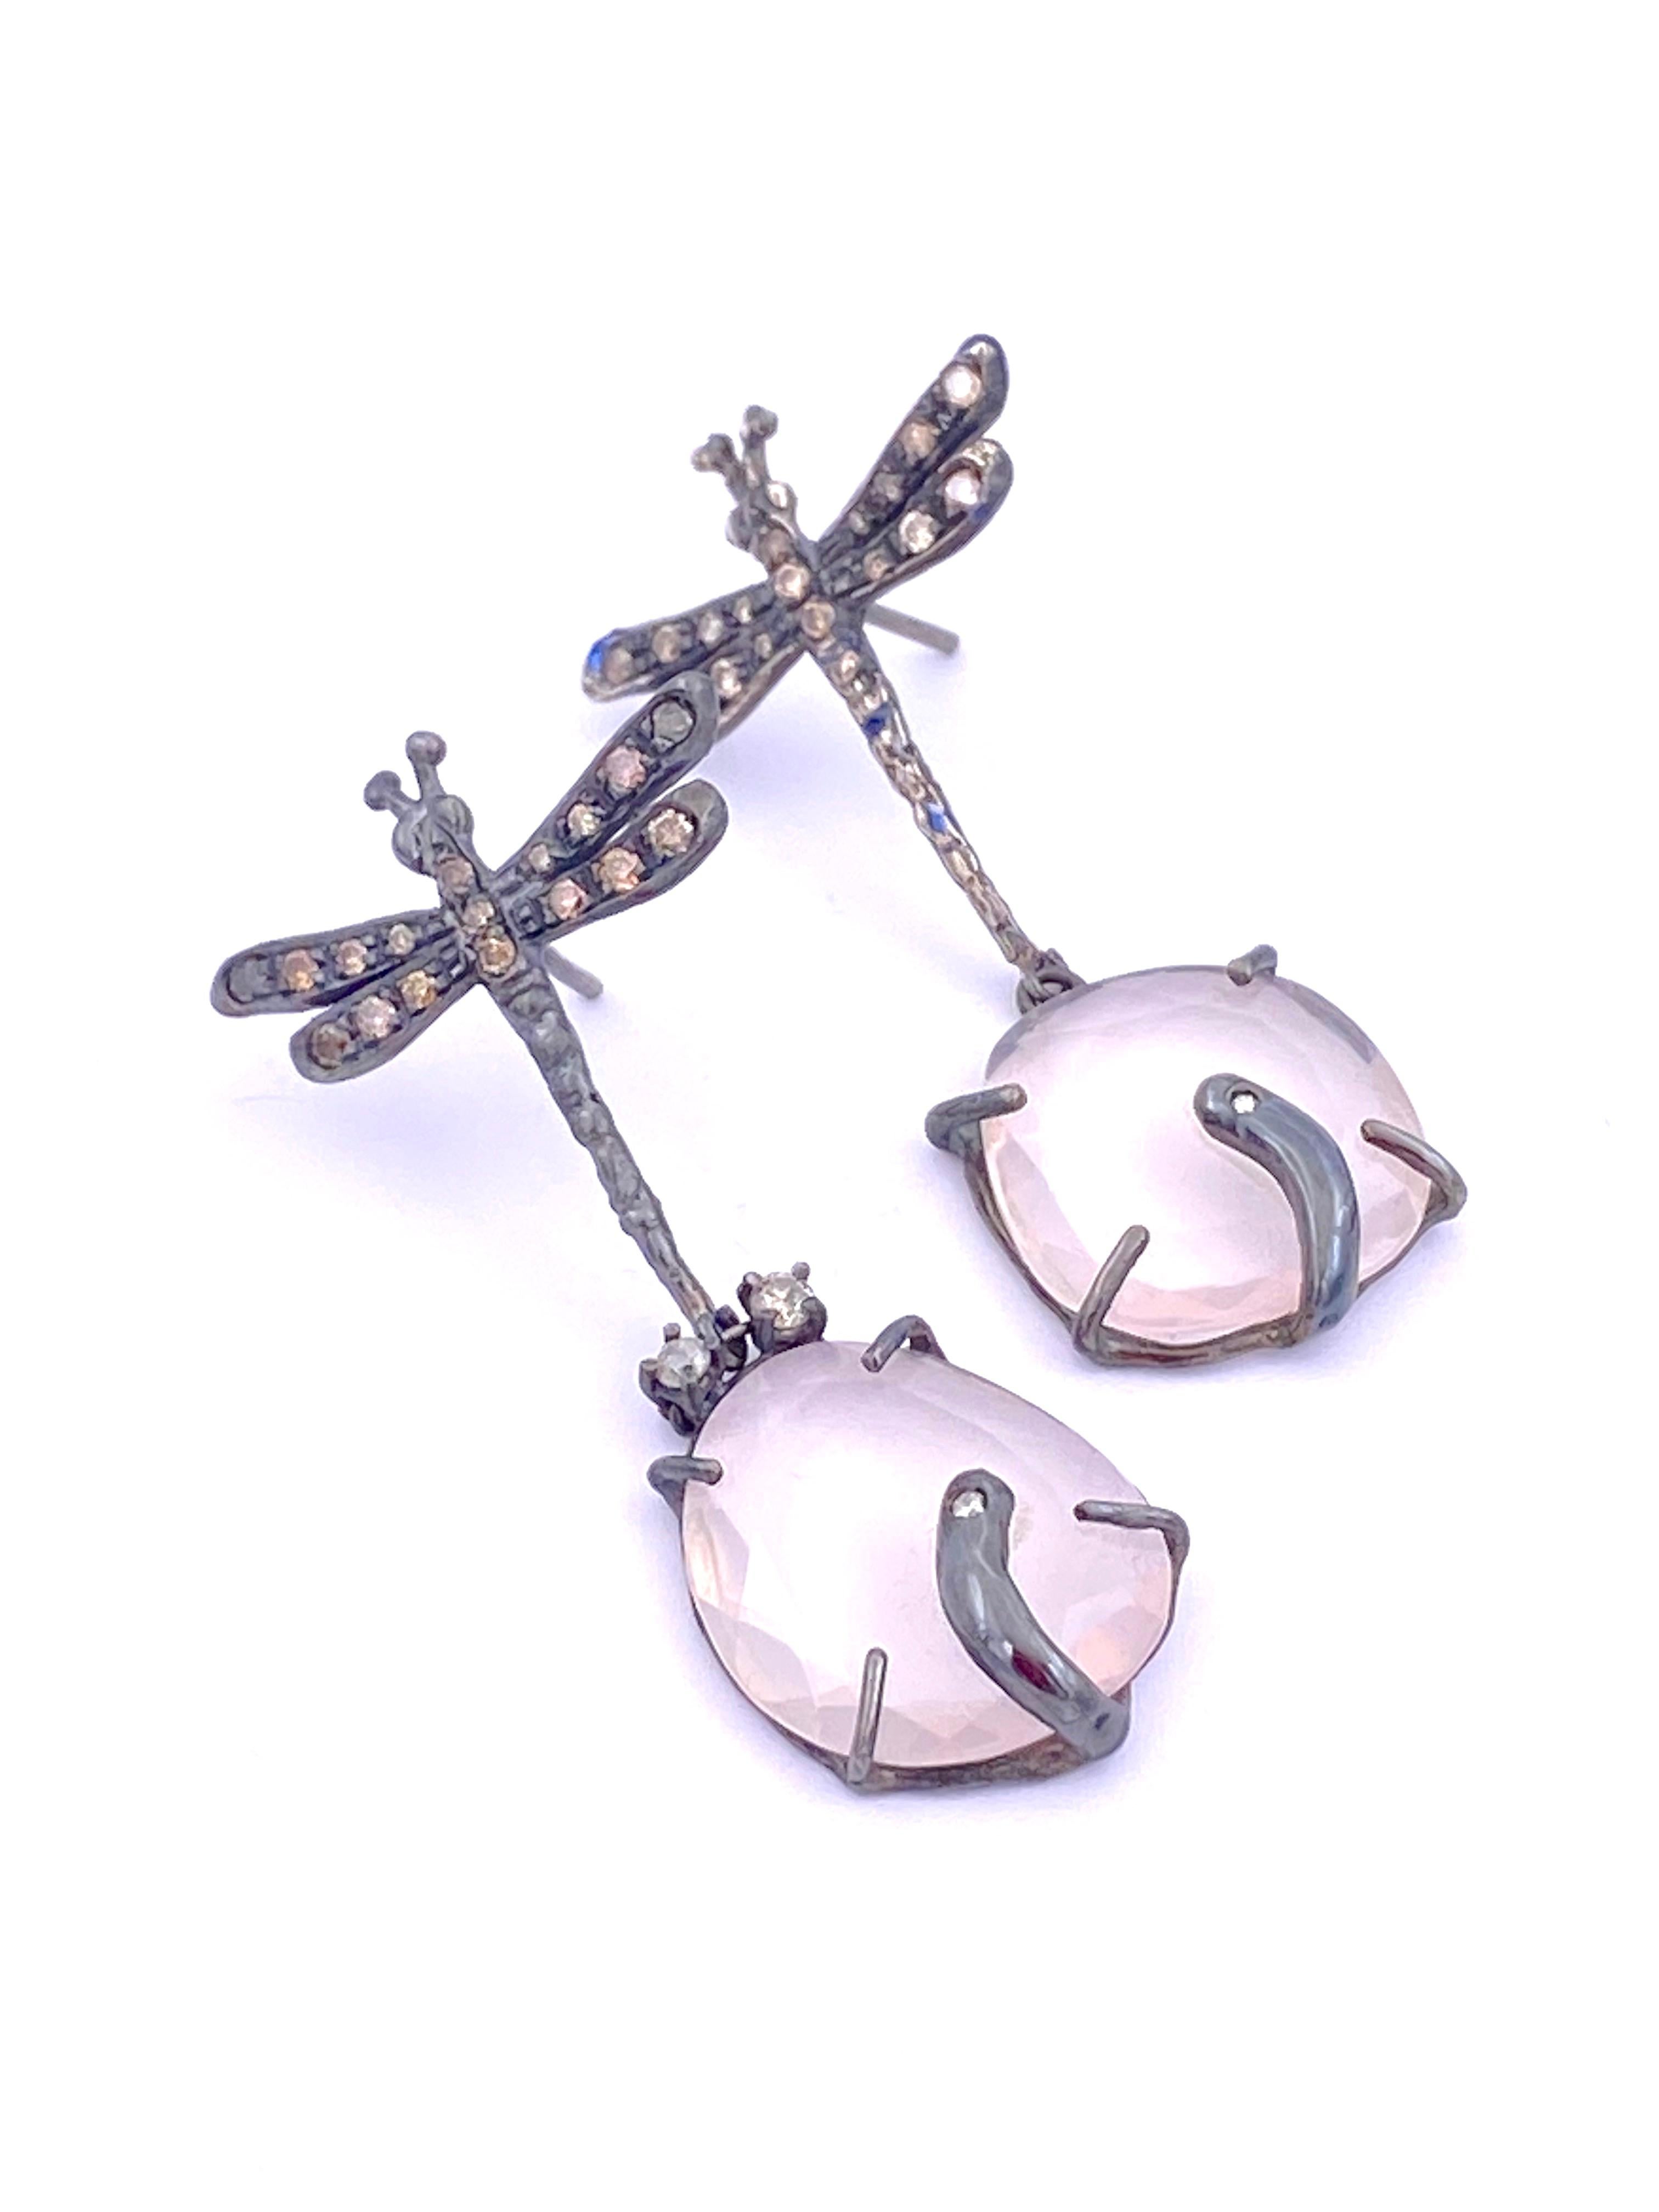 Handcrafted Silver Rose Quartz 0.50 Kt Brown & Grey Diamond Dragonfly Dangle Earrings
Elegant burnished silver sterling brown diamonds rose quartz pendants, enriched by a tiny beautiful creature, symbol of freedom. 
Item in stock, handling time: 1